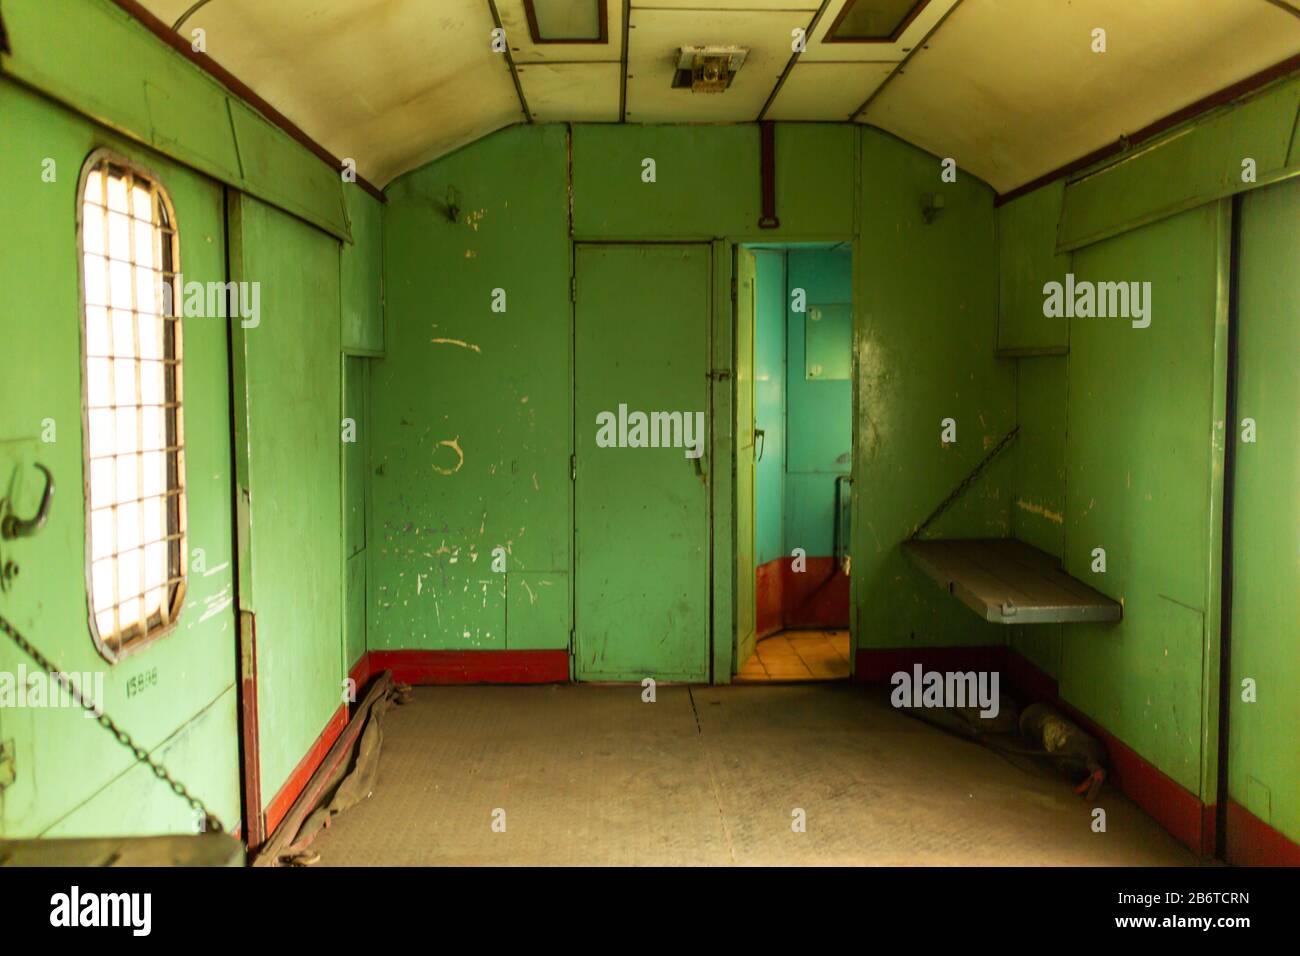 Interior of an old train carriage for transporting prisoners. Stock Photo